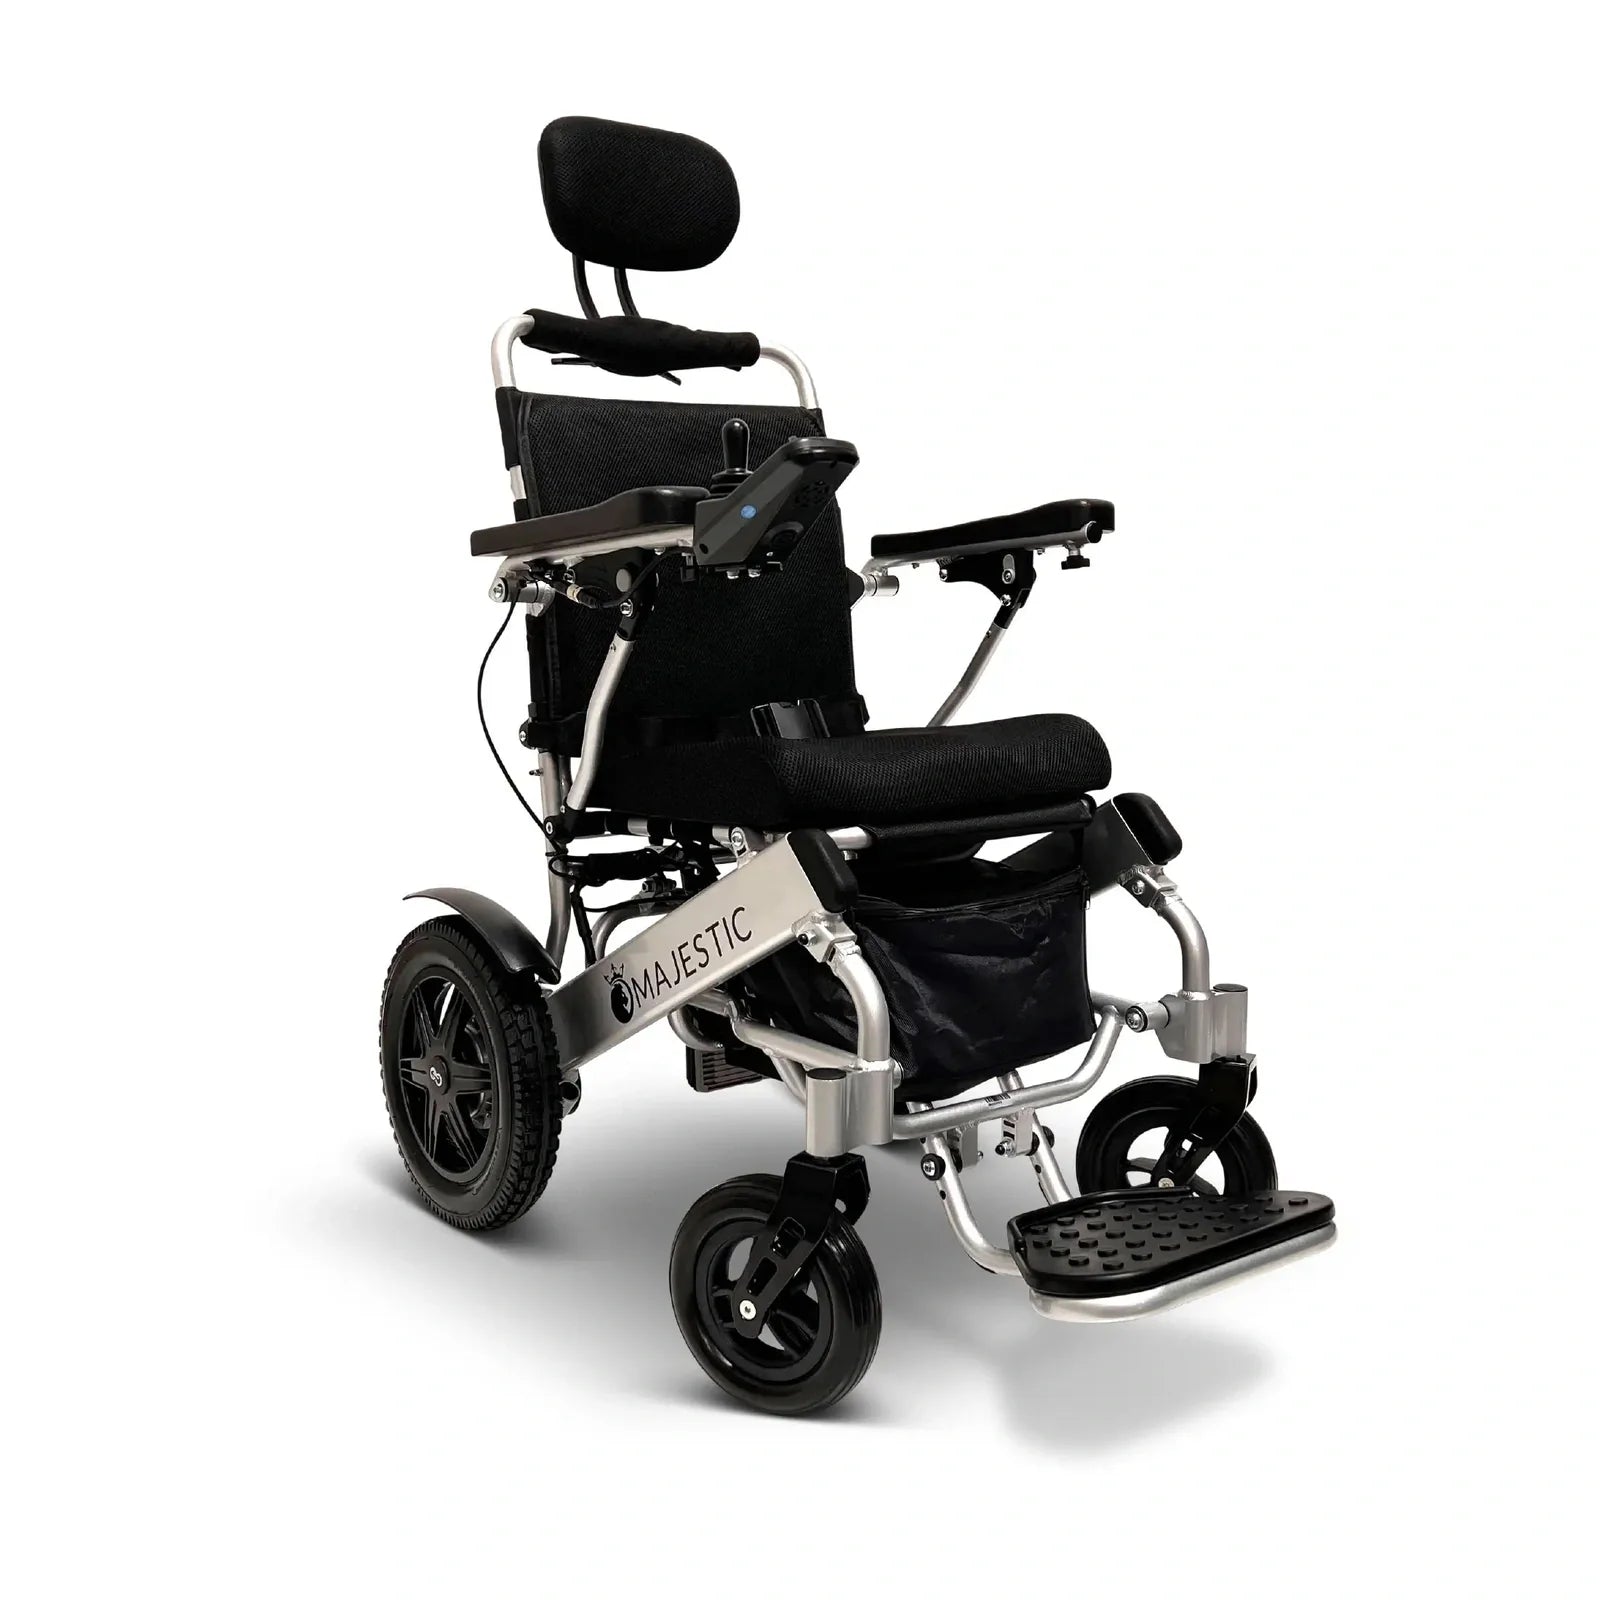 ComfyGO Majestic IQ-9000 Long Range Remote Controlled Folding Reclining Electric Wheelchair Power Wheelchairs ComfyGO Silver Standard Auto Reclining